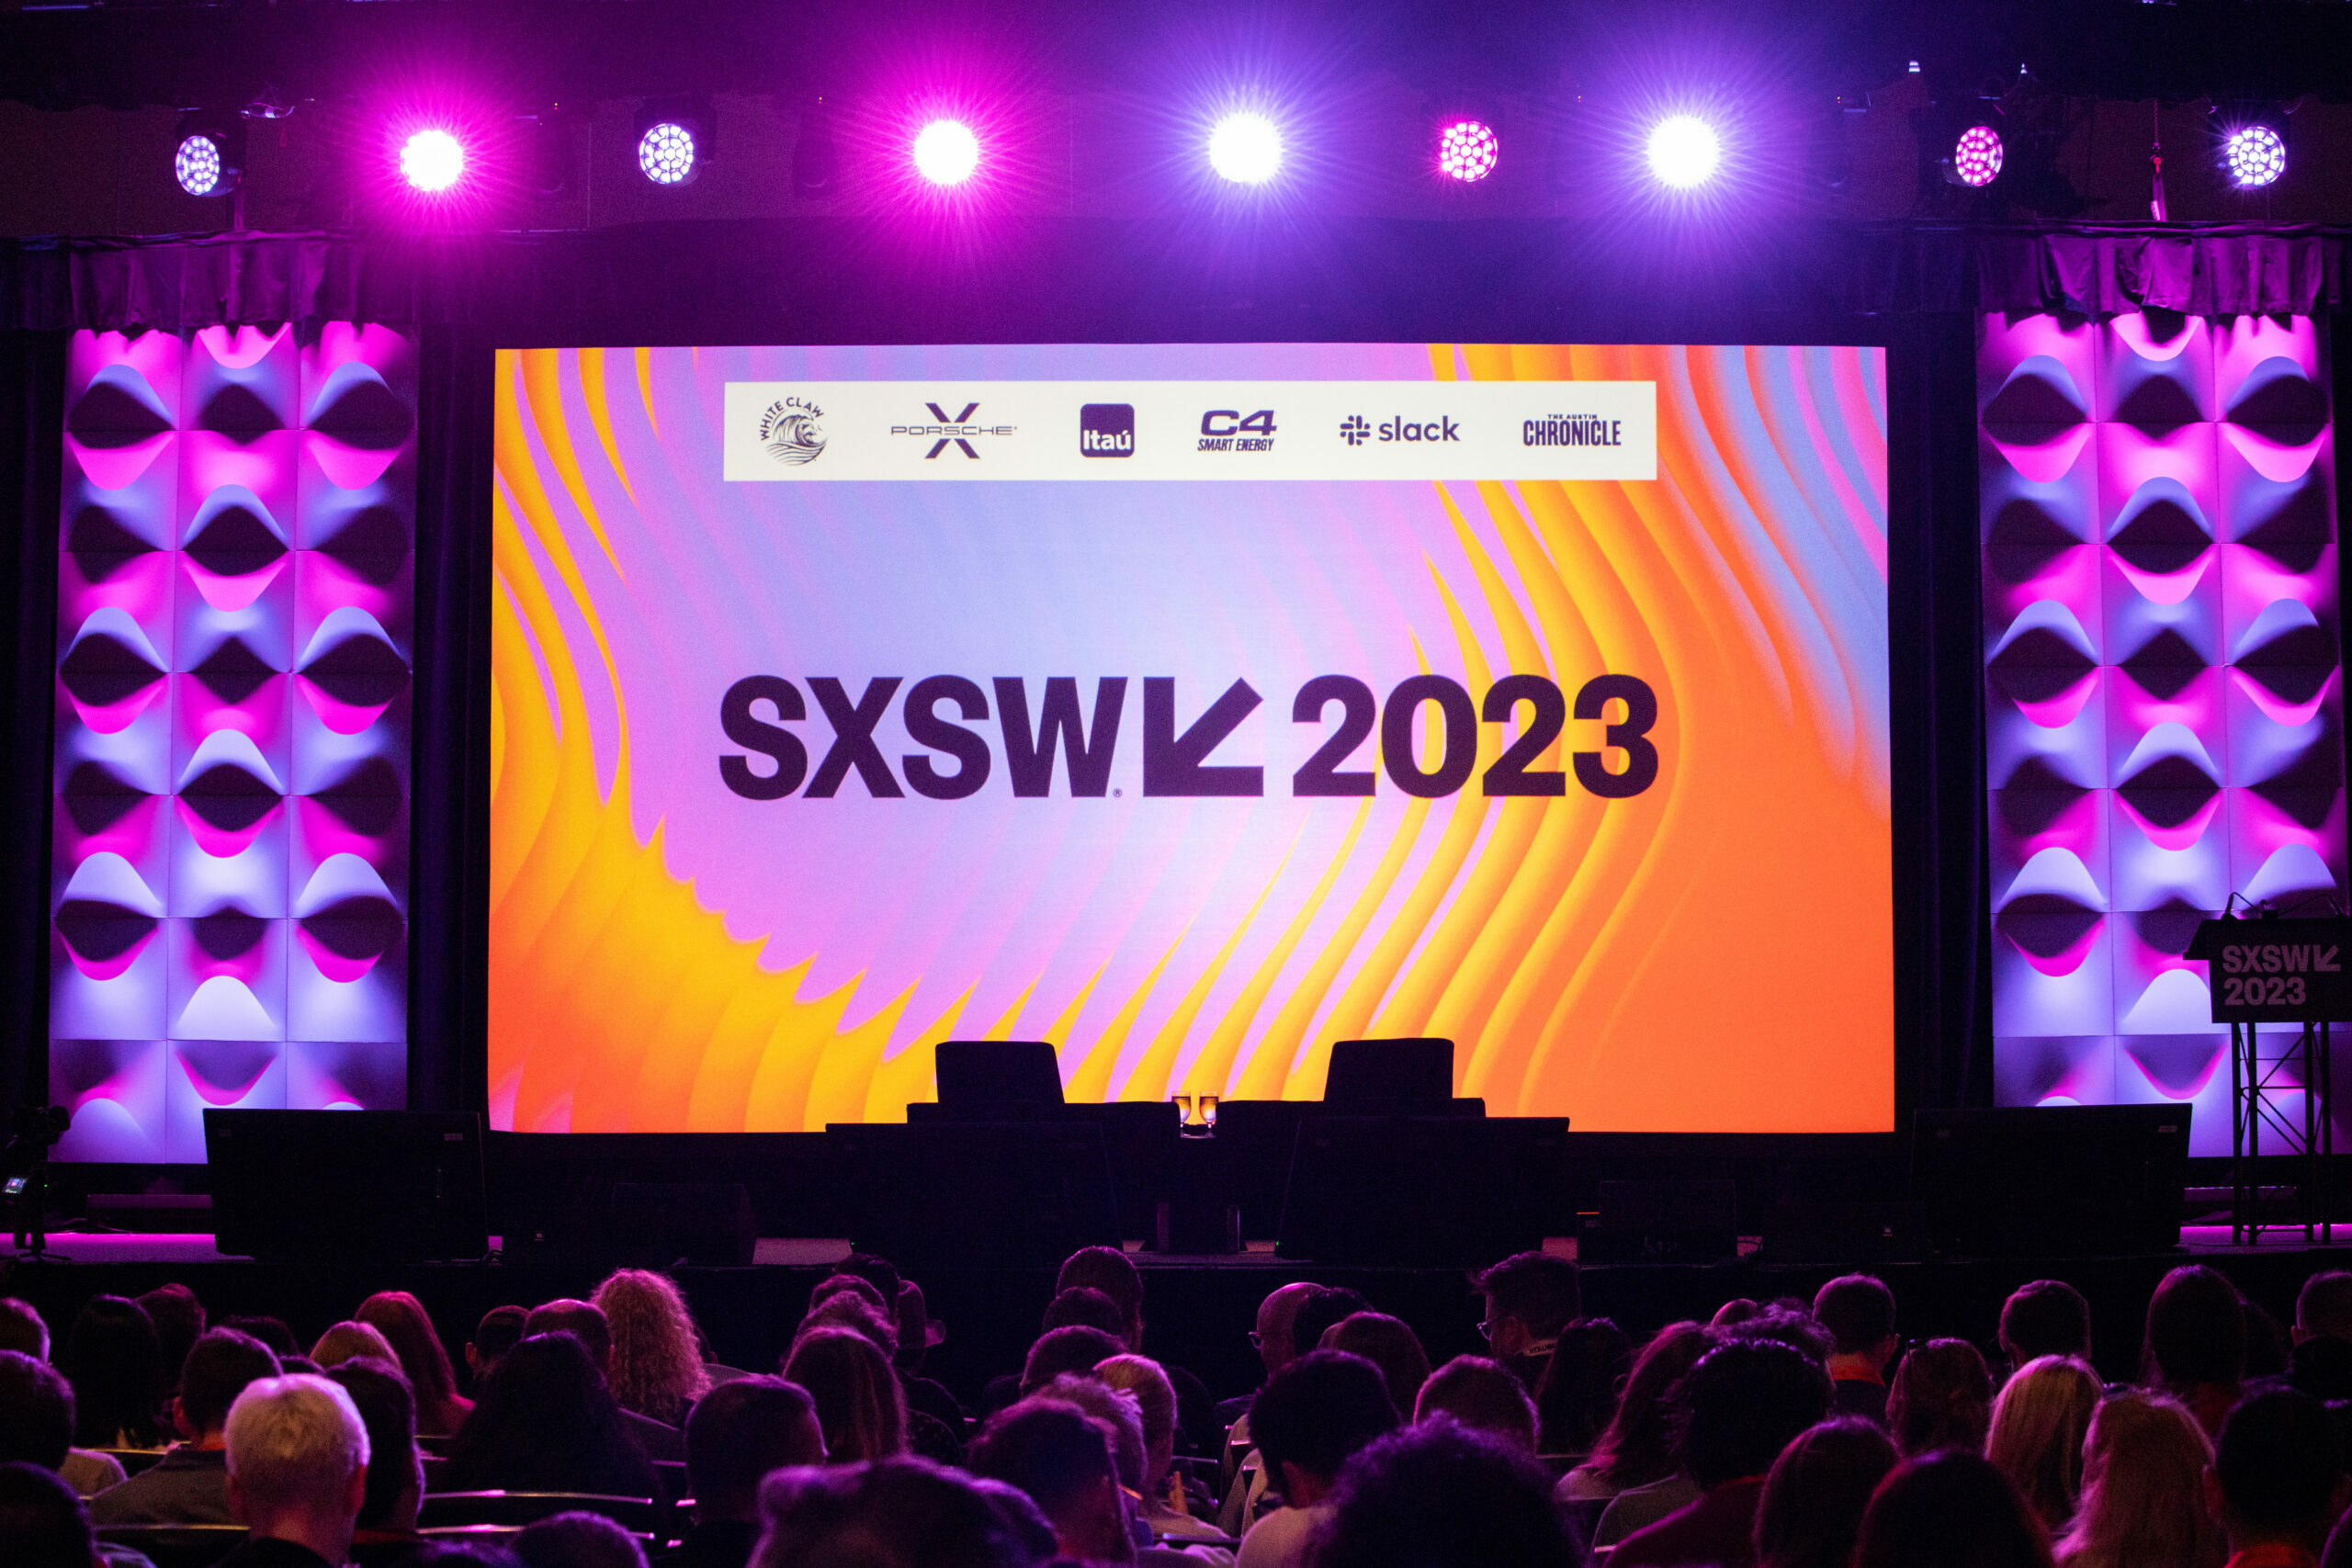 Troy Baker and Anjali Bhimani To Perform Live At The SXSW